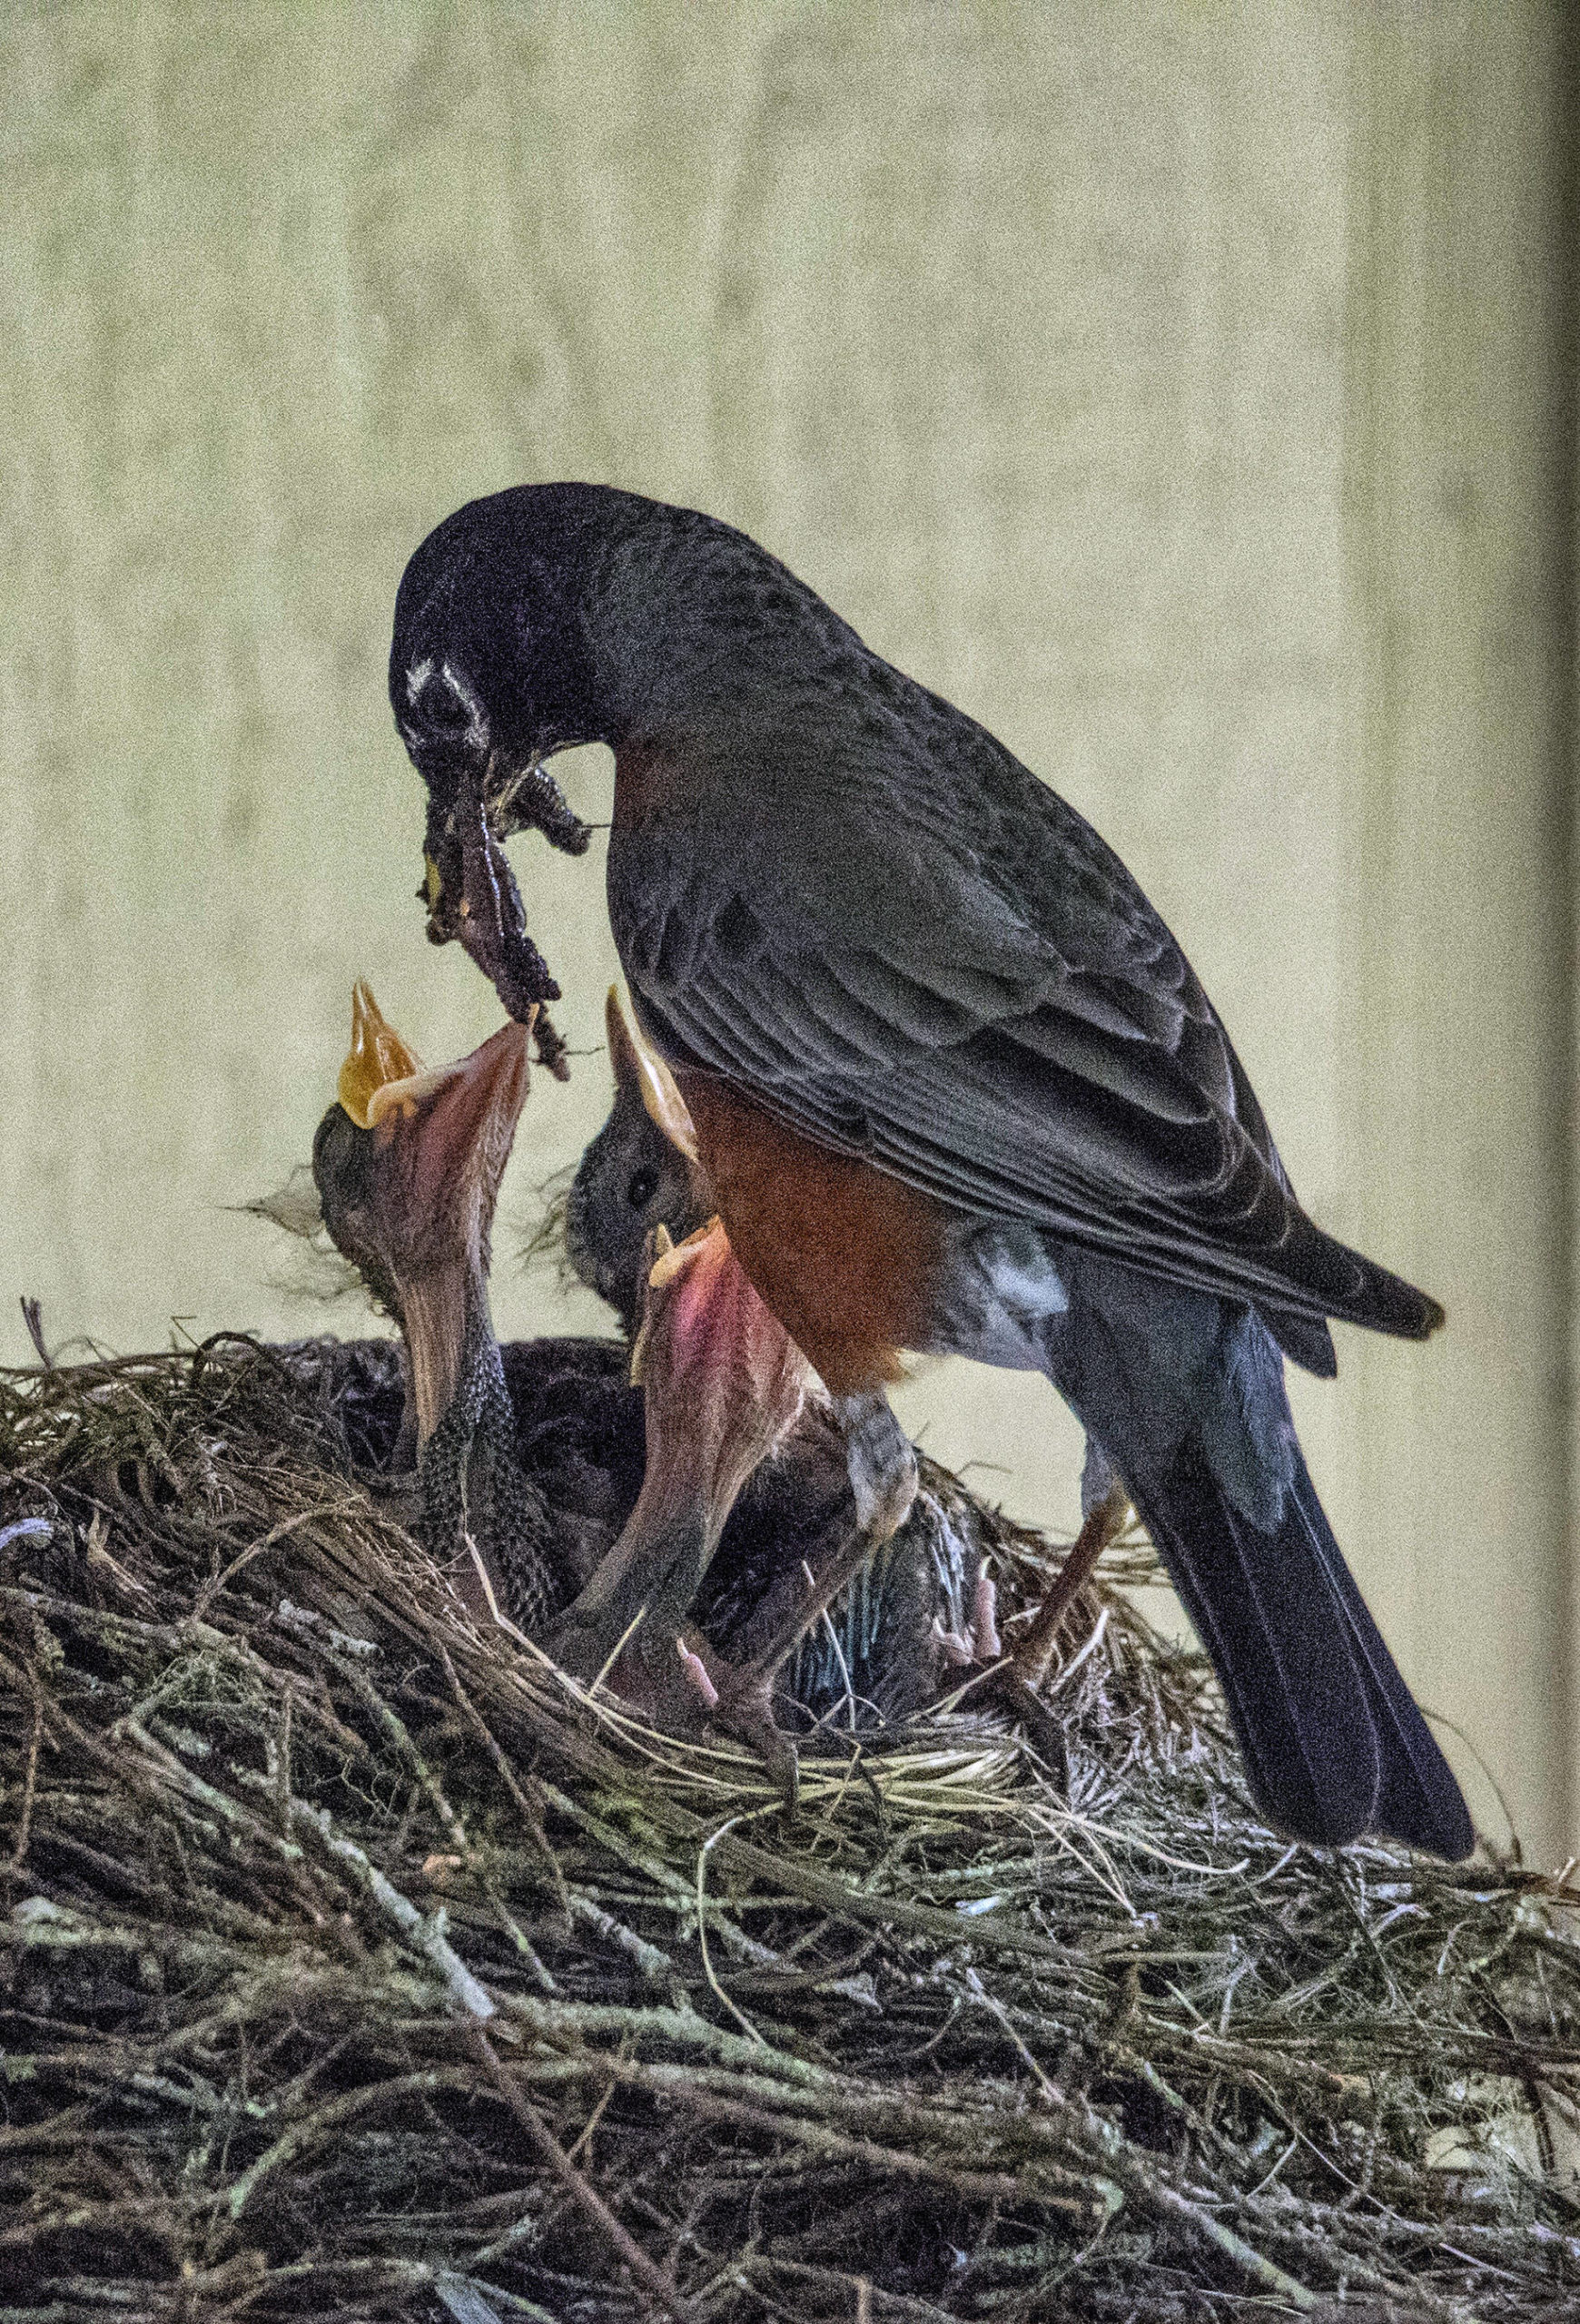 A male American robin feeds four chicks in this photo shared Monday, June 15. (Courtesy Photo | Kenneth Gill, gilfoto)